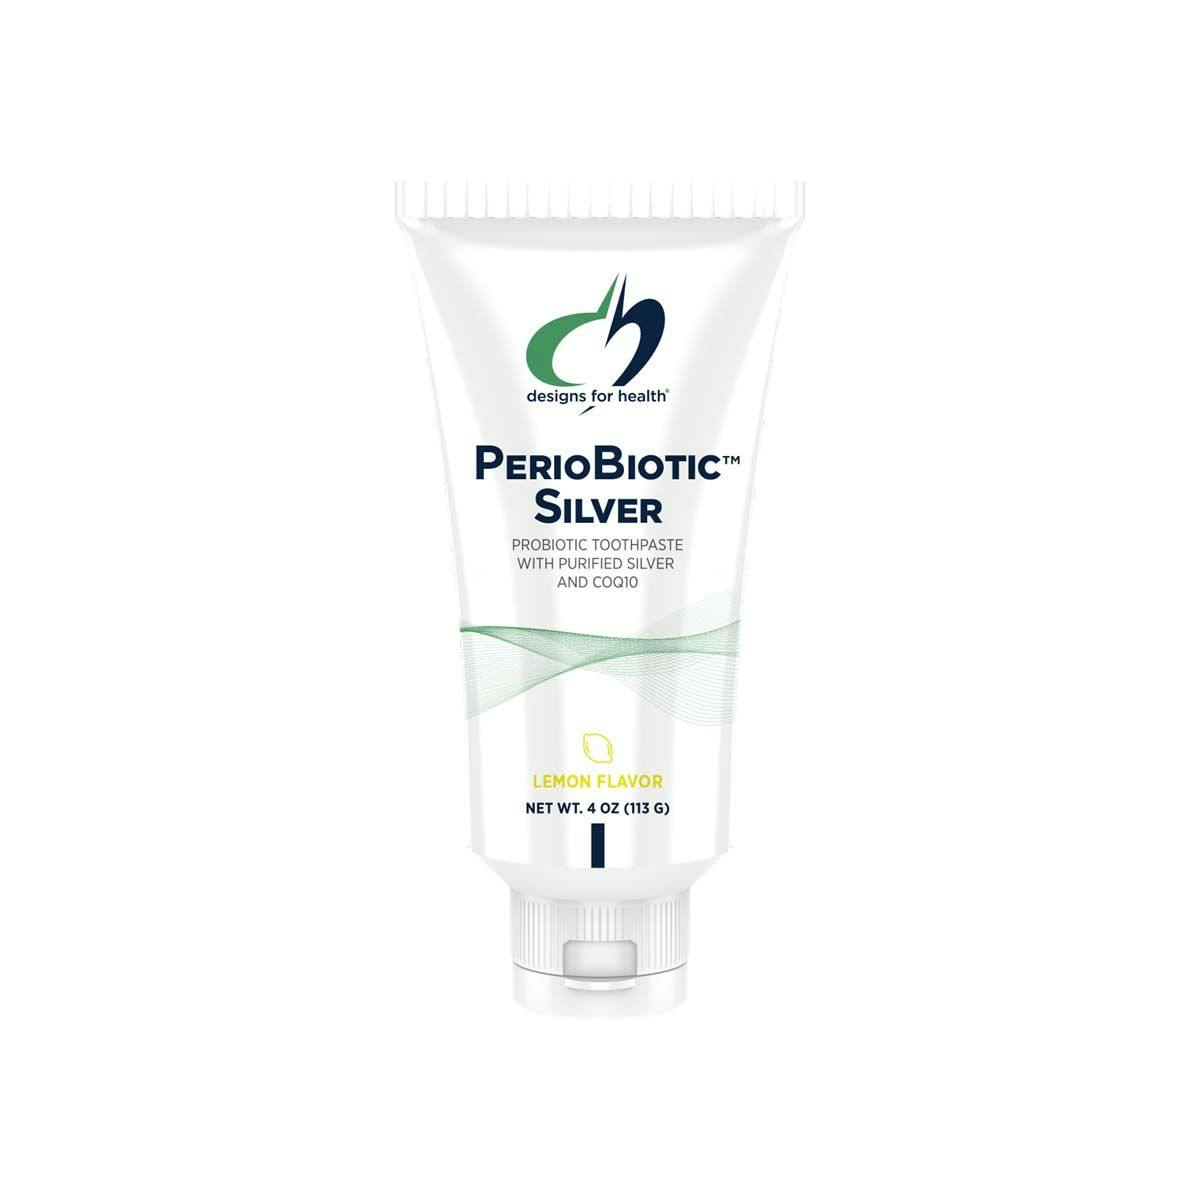 Designs for Health Launches PerioBiotic™ Silver, a Fluoride-Free Probiotic Toothpaste for Enhanced Oral Health. Image credit: © Designs for Health